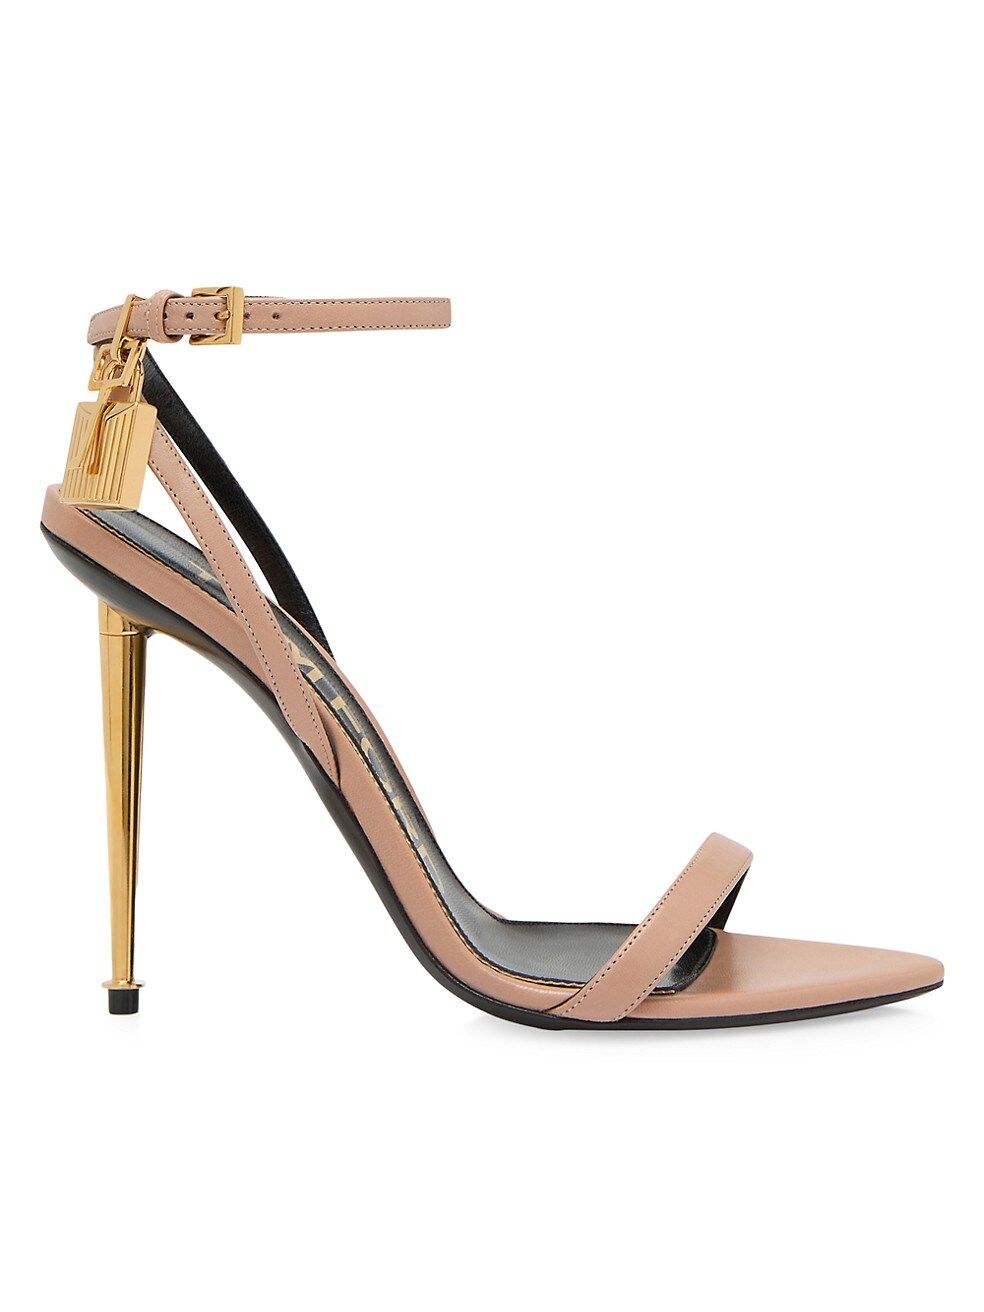 Naked 105 Lizard-Embossed Leather Ankle-Strap Sandals | Saks Fifth Avenue